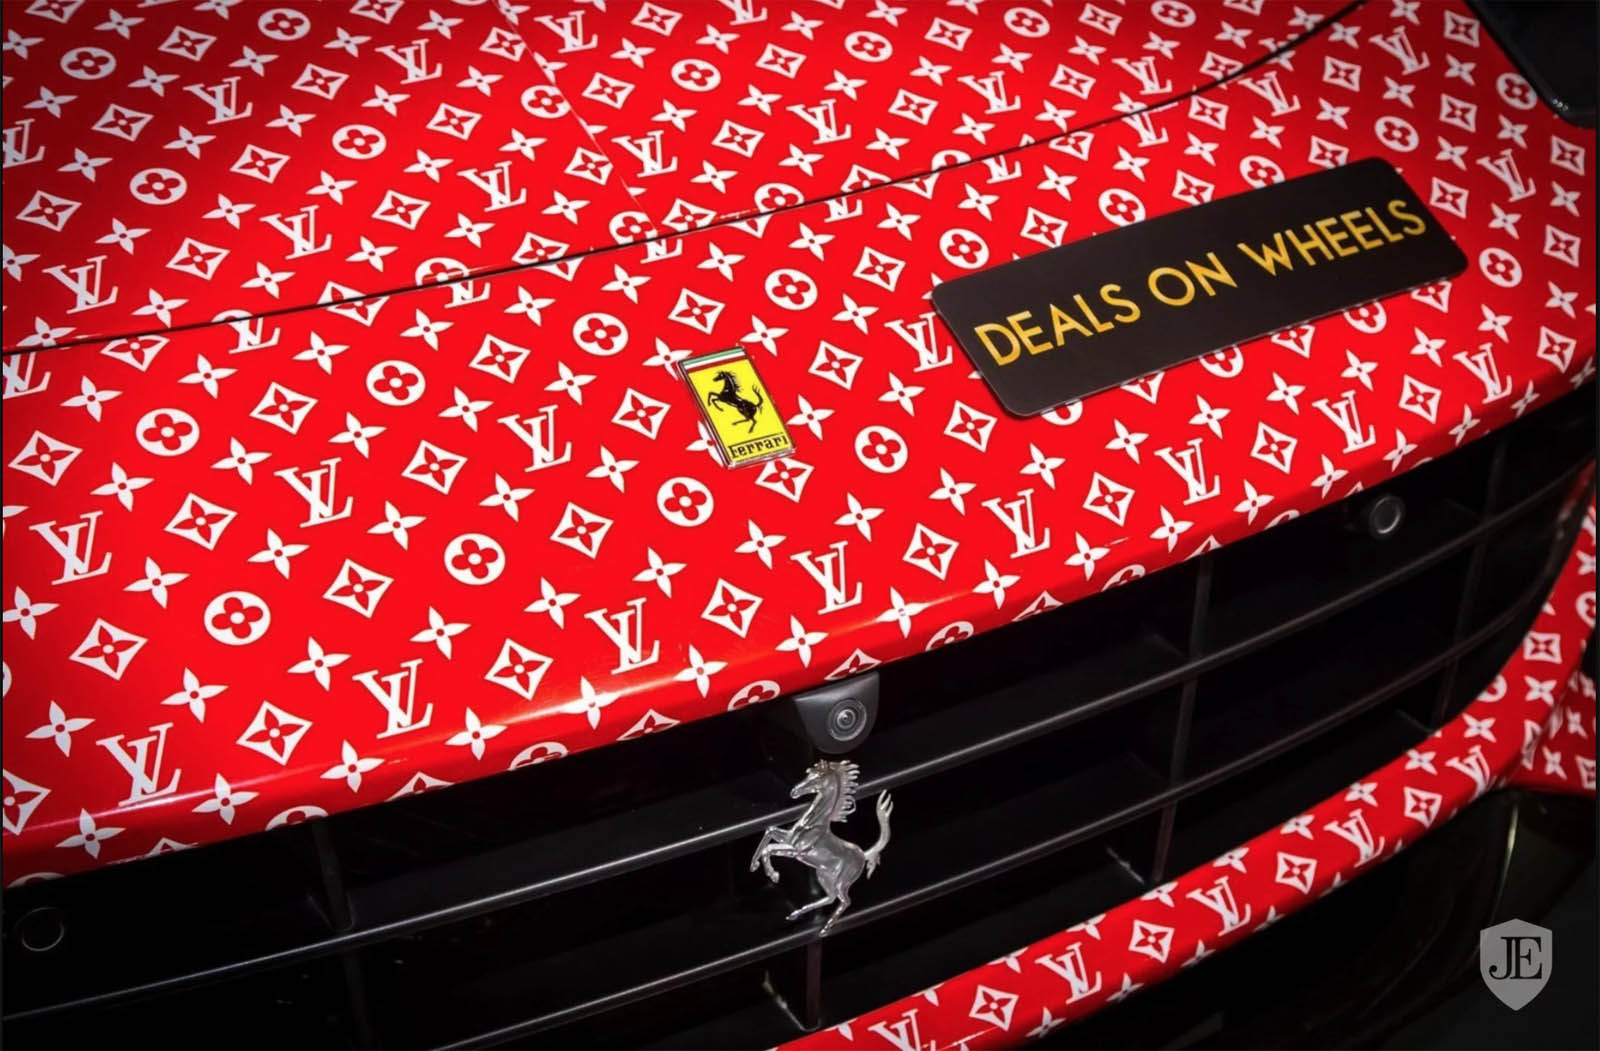 Ferrari F12 Berlinetta in Louis Vuitton Wrapping for Sale on JamesEdition